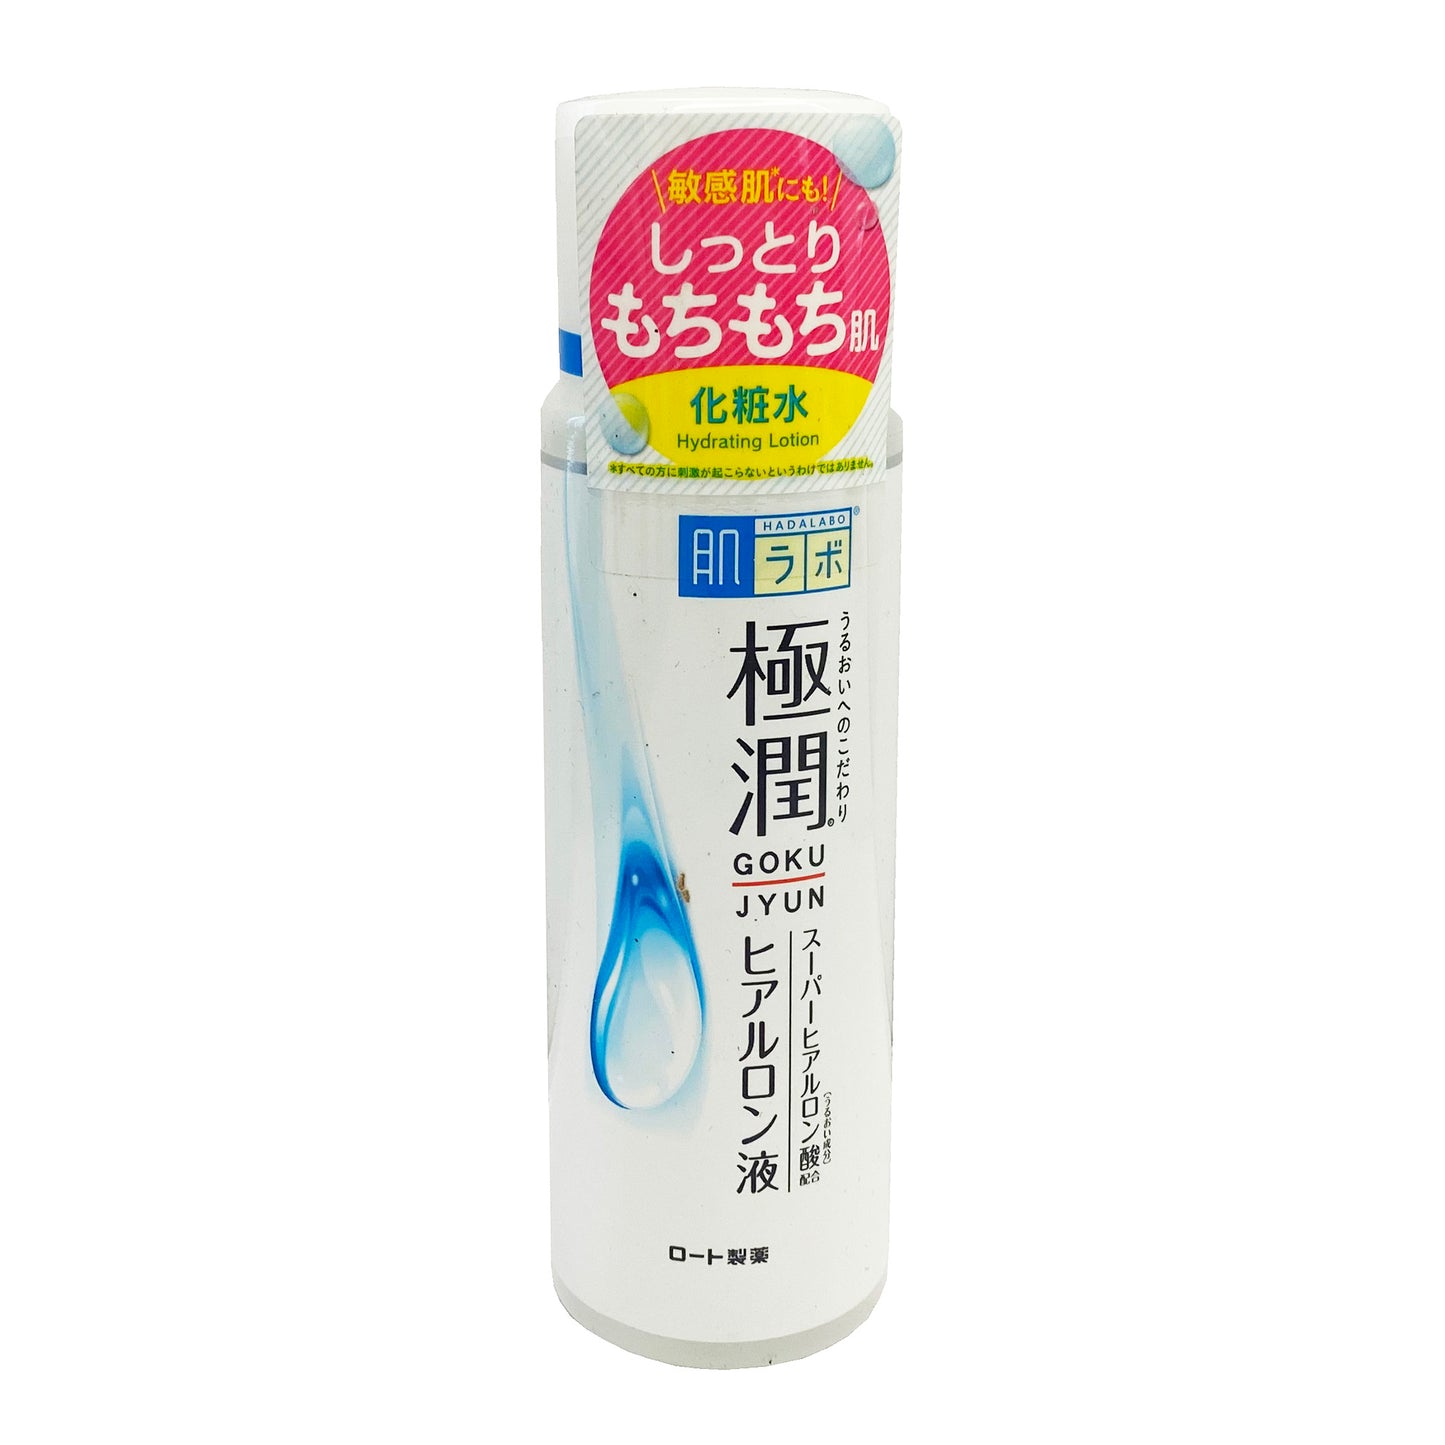 Front graphic view of Rohto Hada Labo Gokujun Hyaluronic - Hydrating Lotion 5.7oz